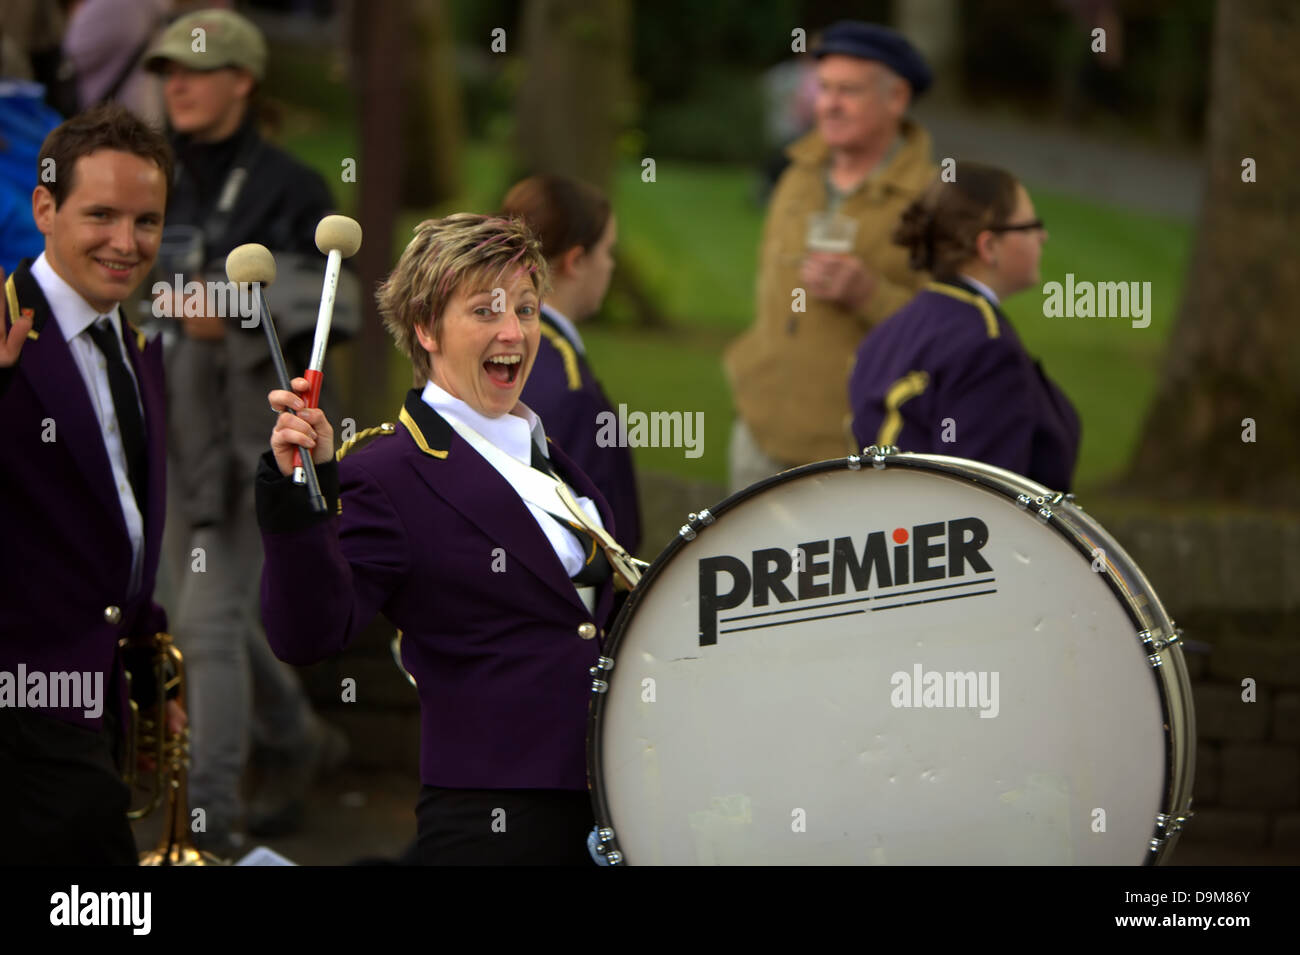 Happy girl-drummer at the Brass Band Contest on May 28, 2010 in Saddleworth, England. Stock Photo